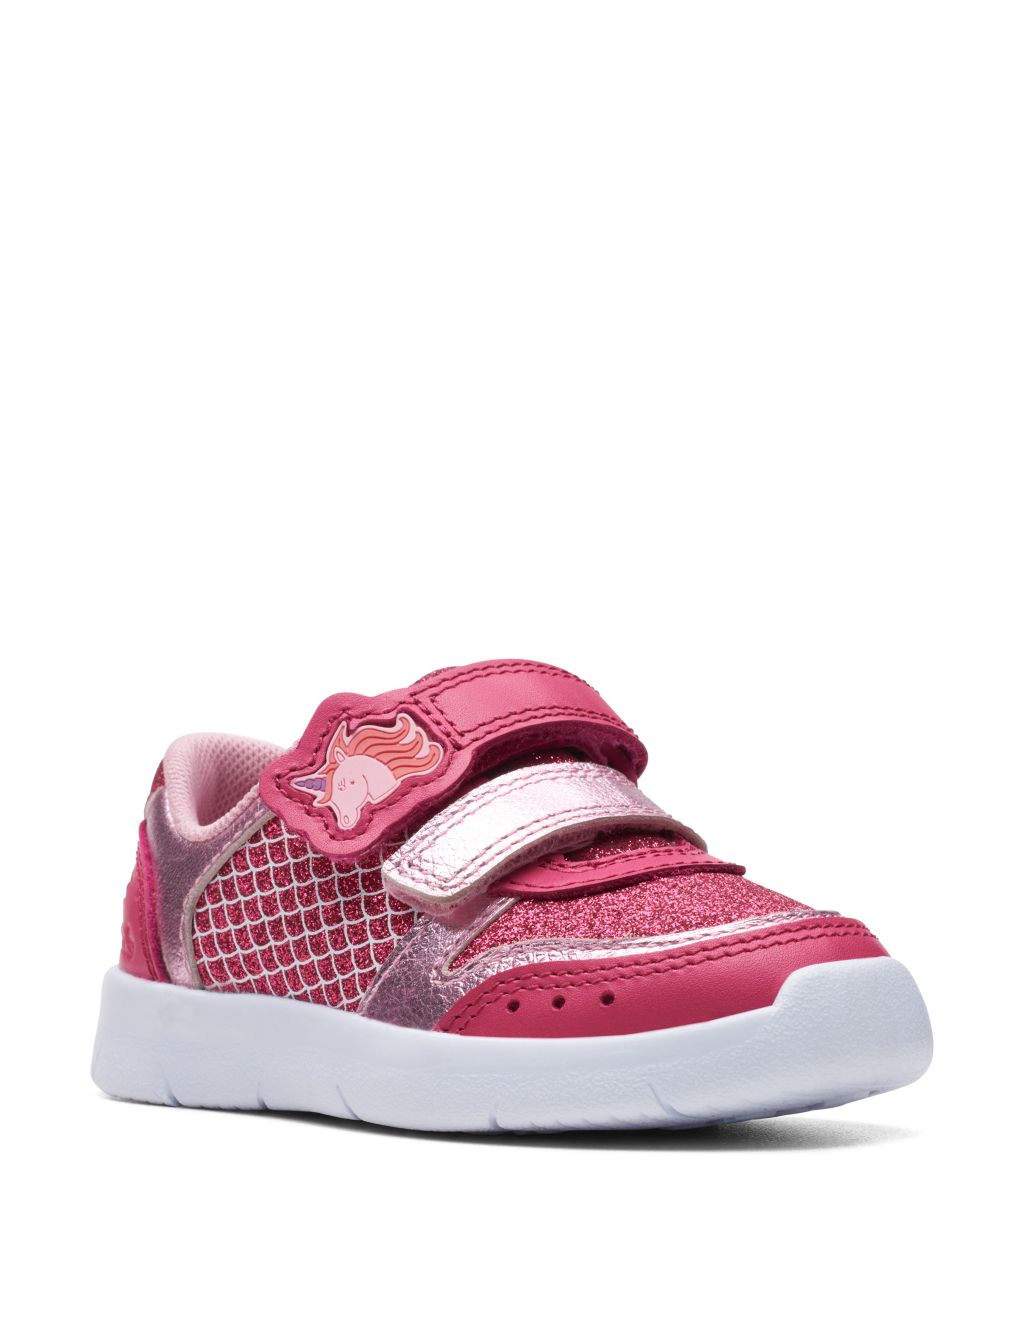 Kids' Leather Glitter Riptape Trainers (3 Small - 6½ Small) image 2